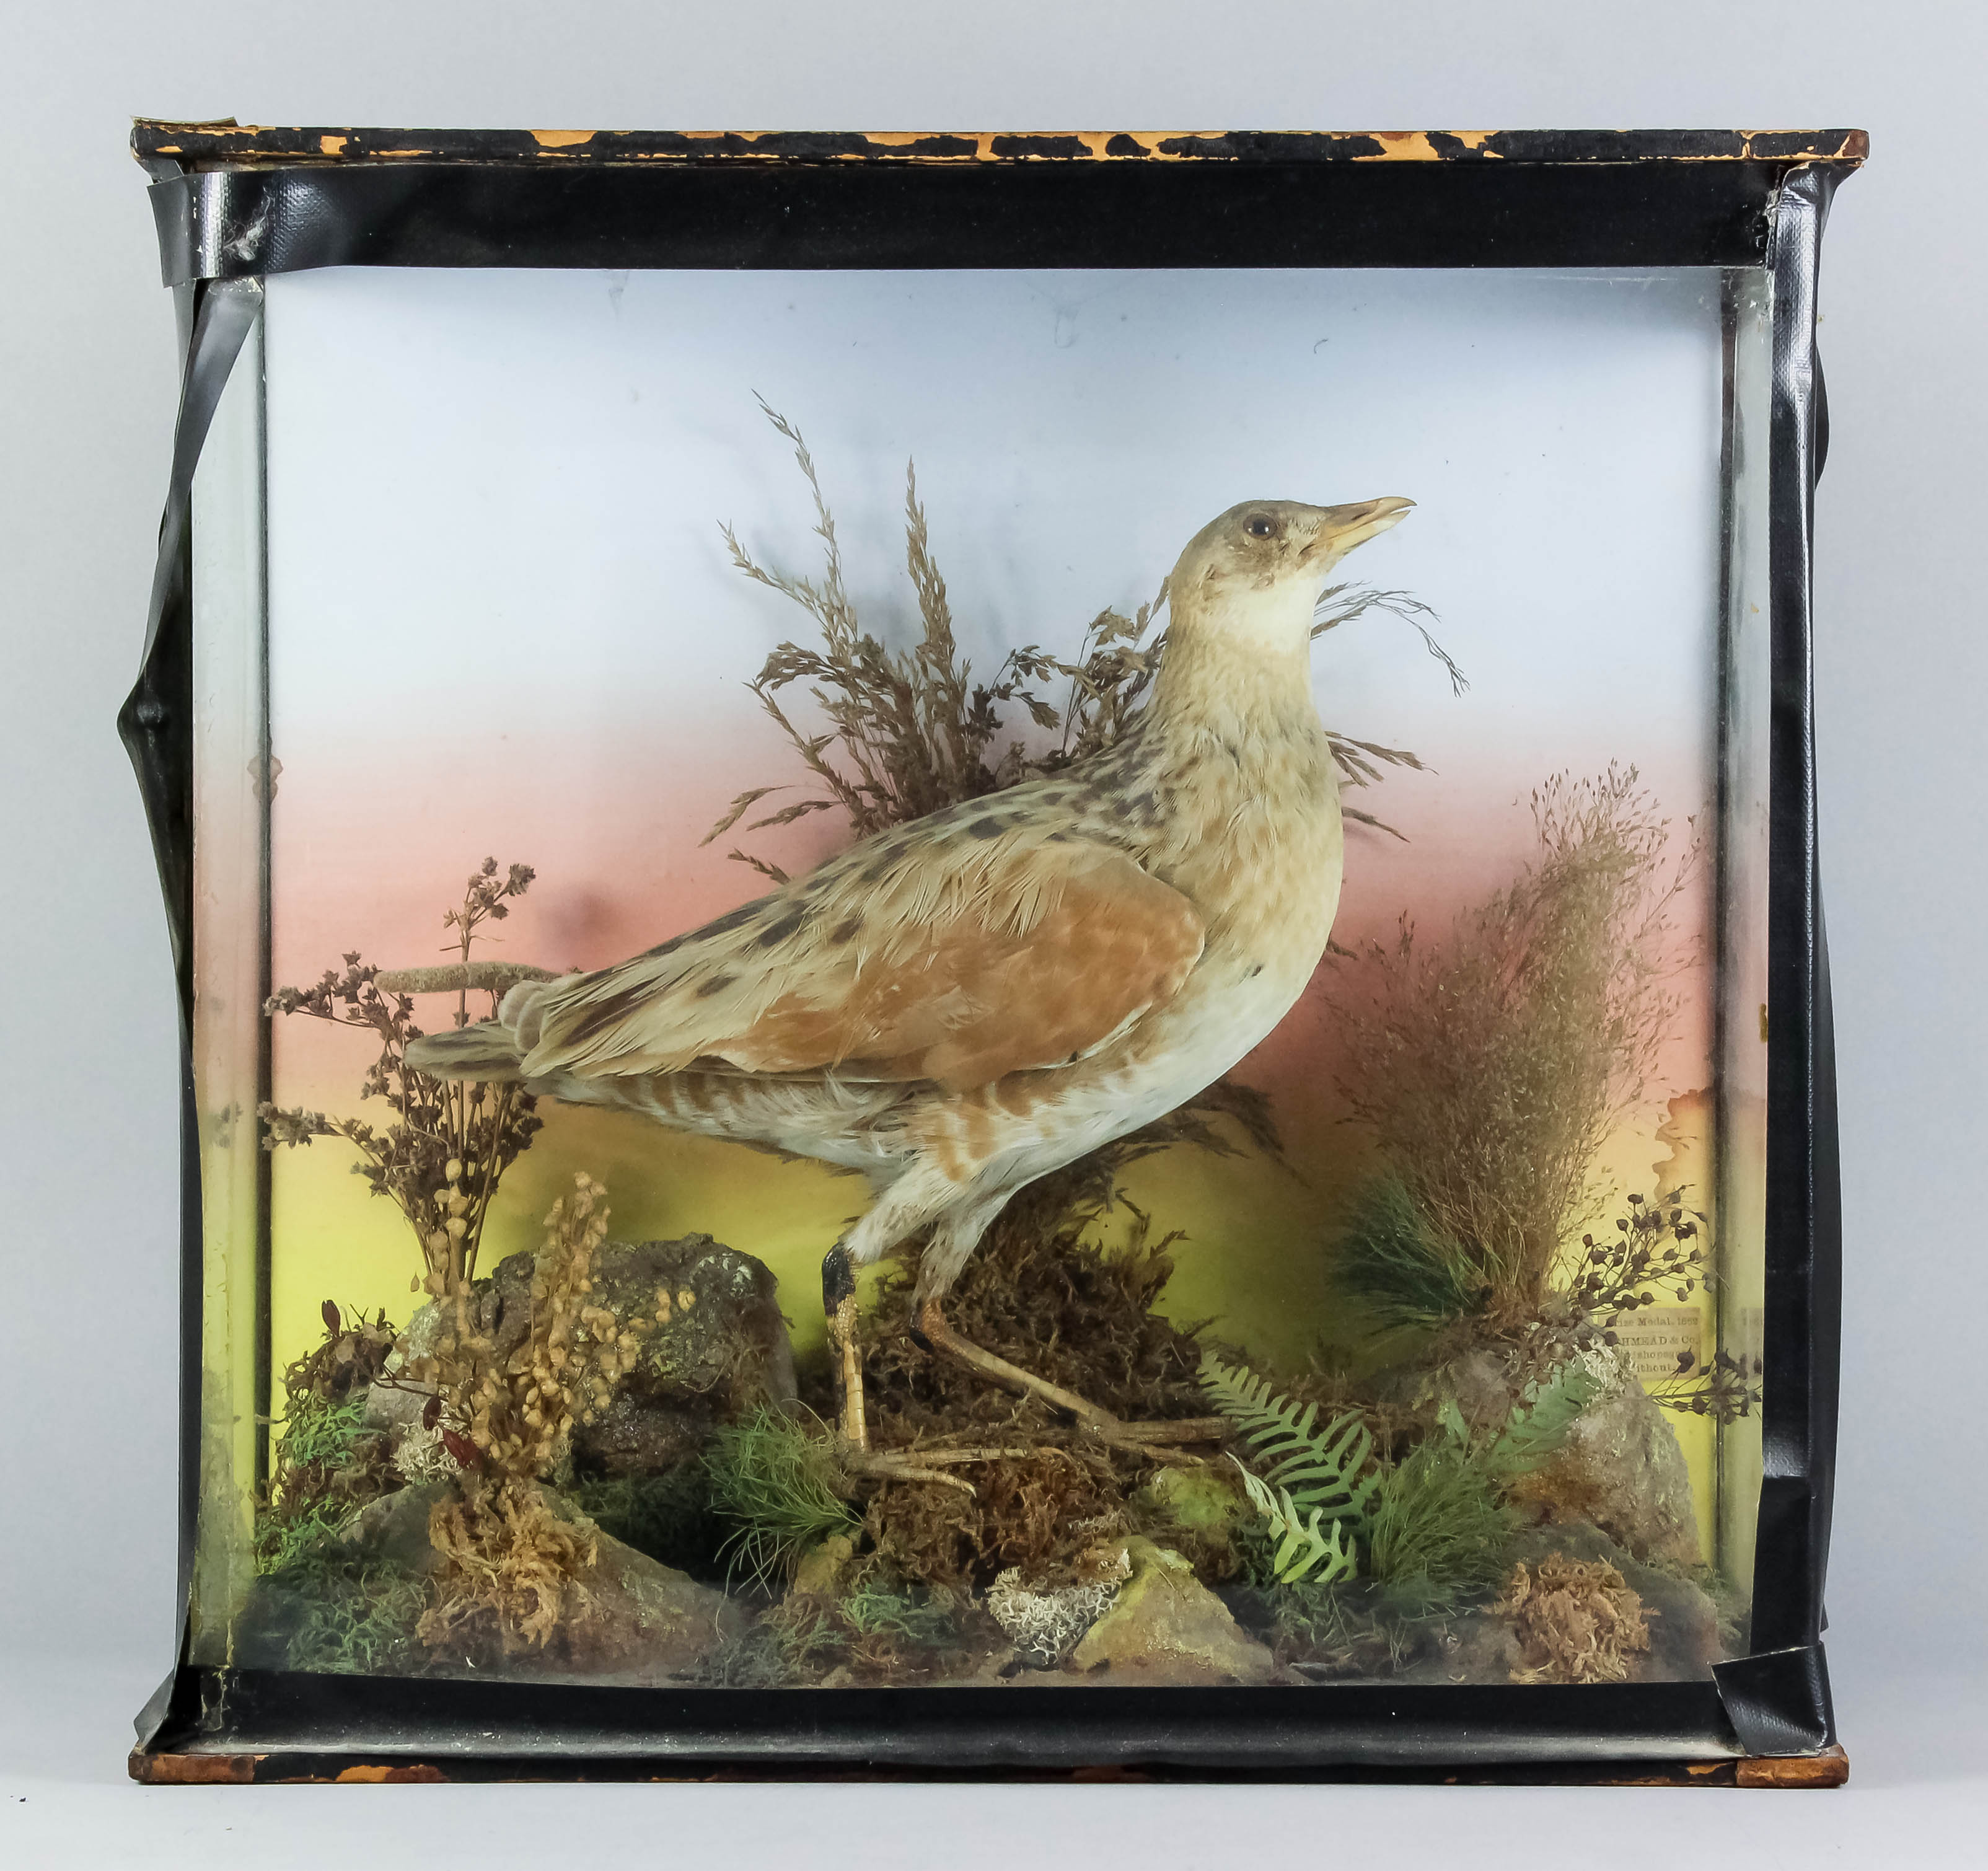 An early 20th Century English taxidermy study of a Landrail or Corn Crake (crex crex) standing among